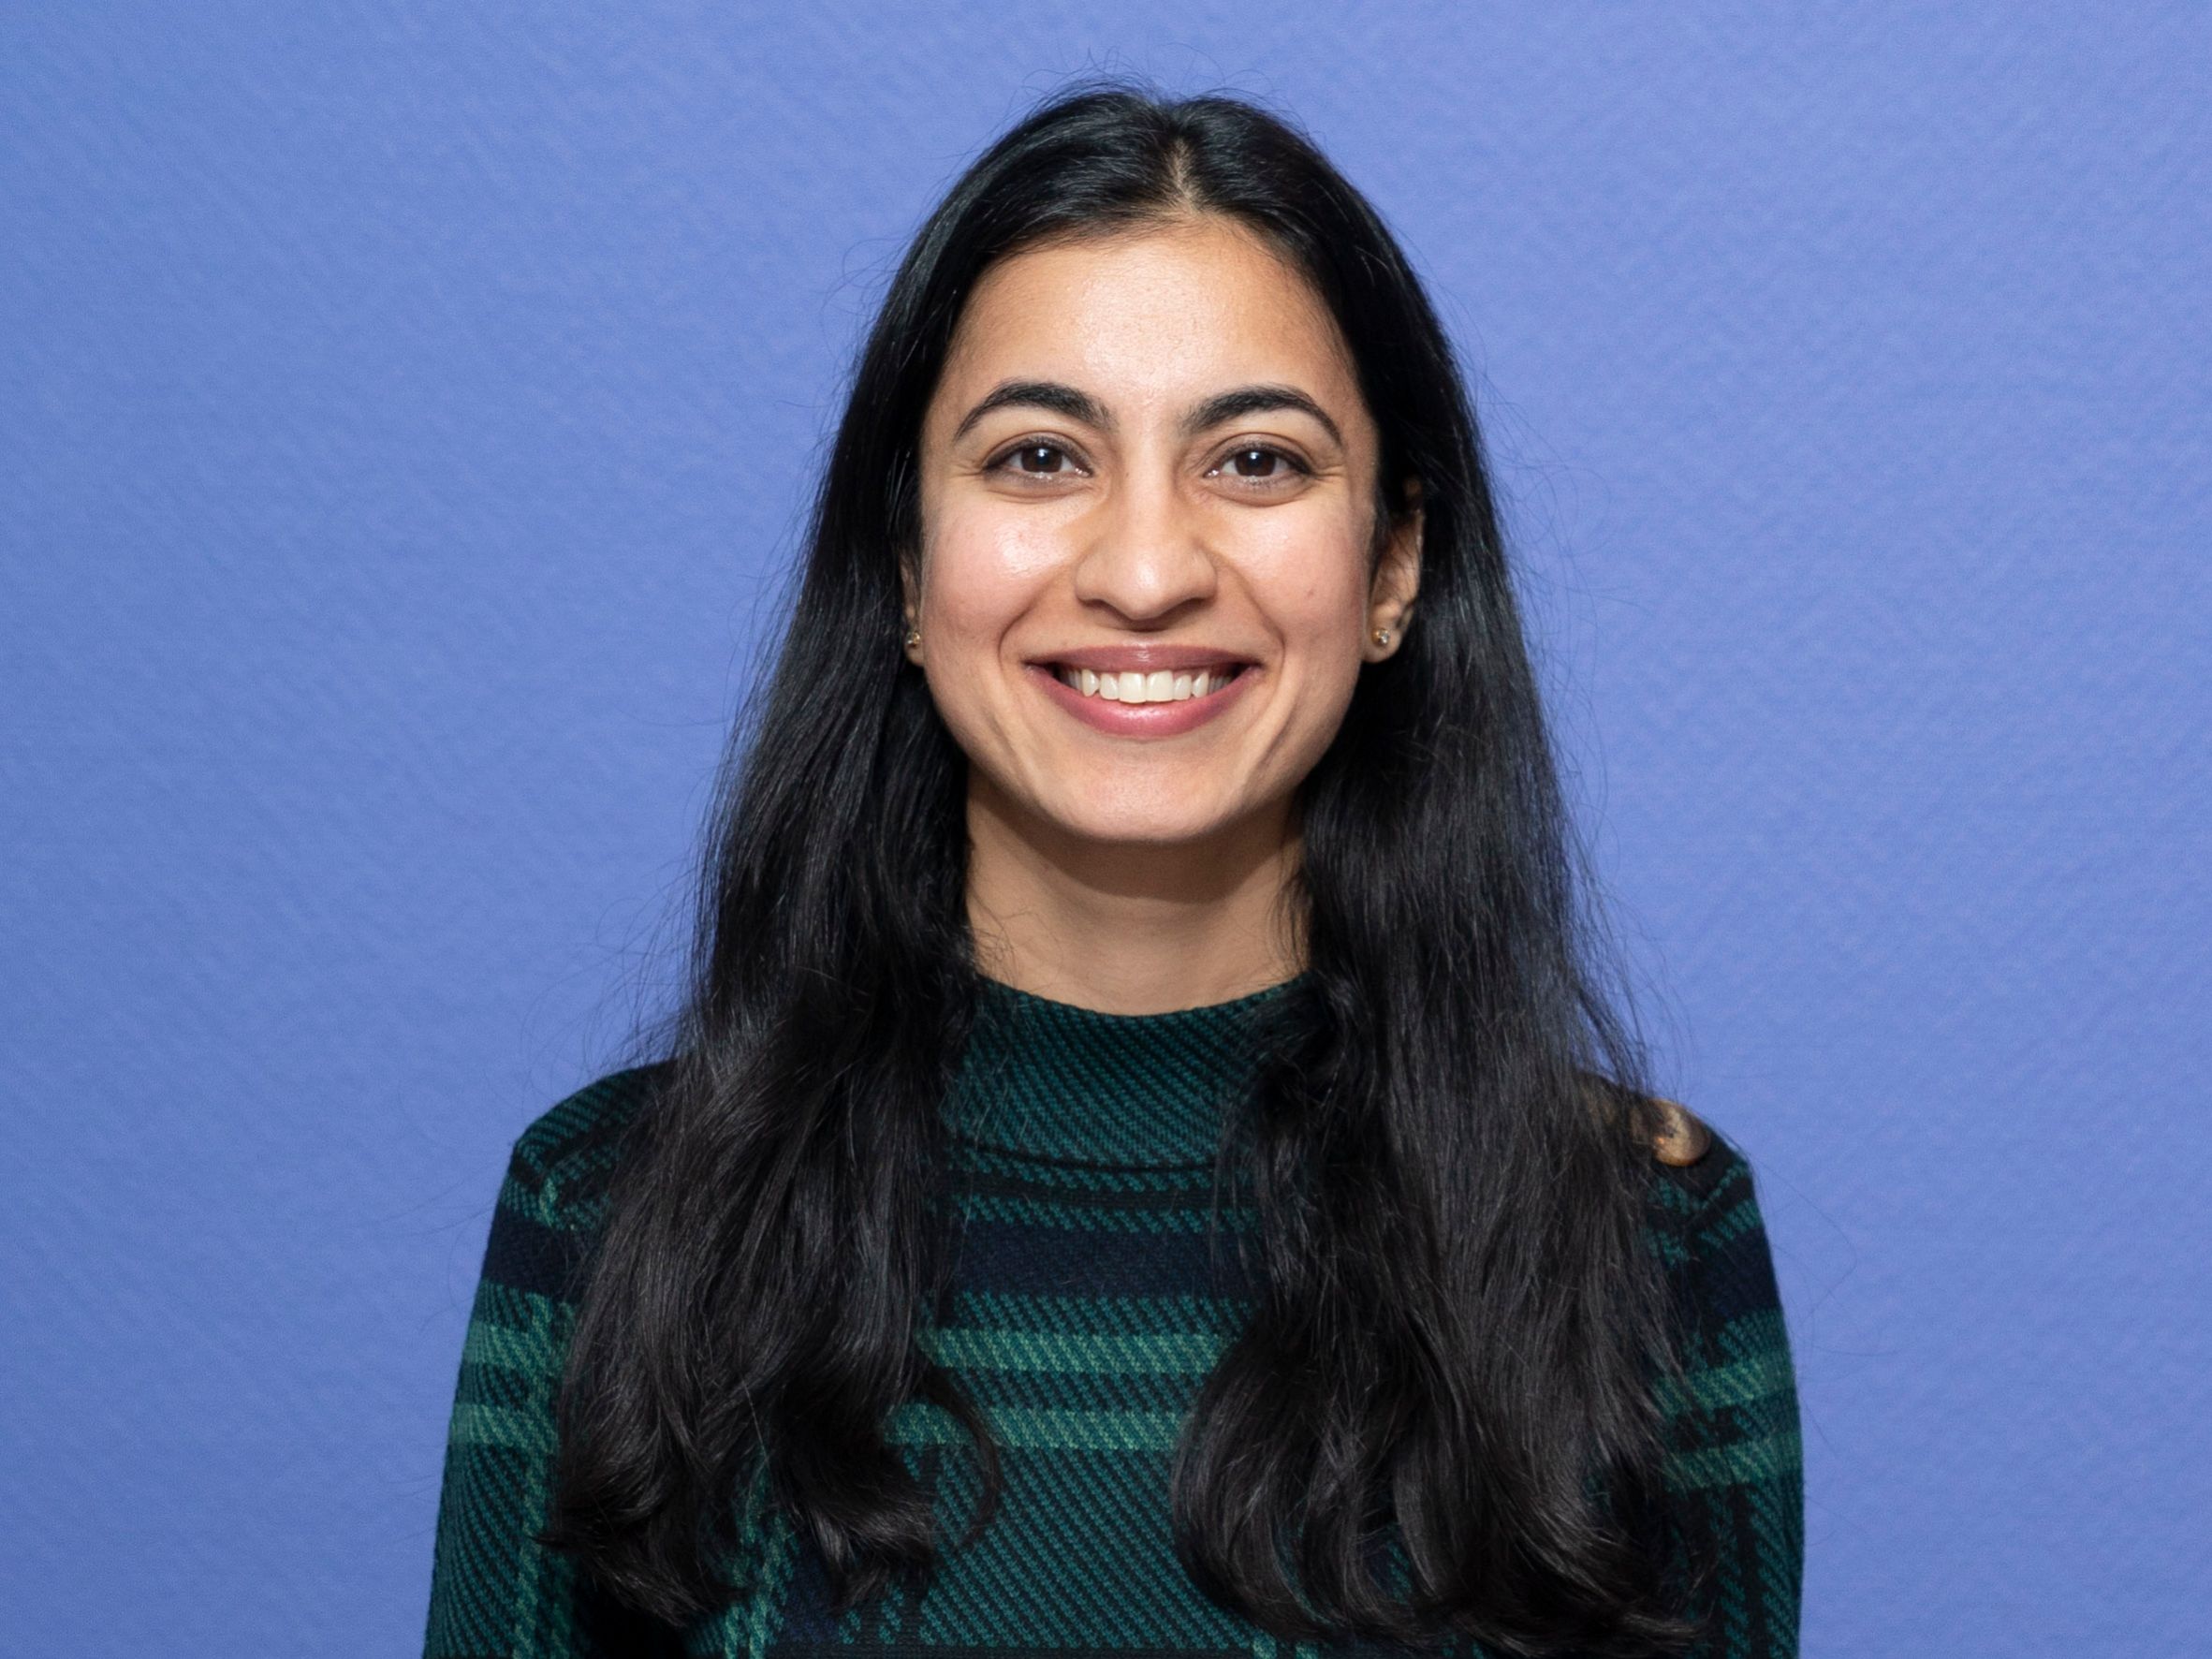 Esha Mendiratta joined the University of Groningen in 2016 after a PhD in Sydney.